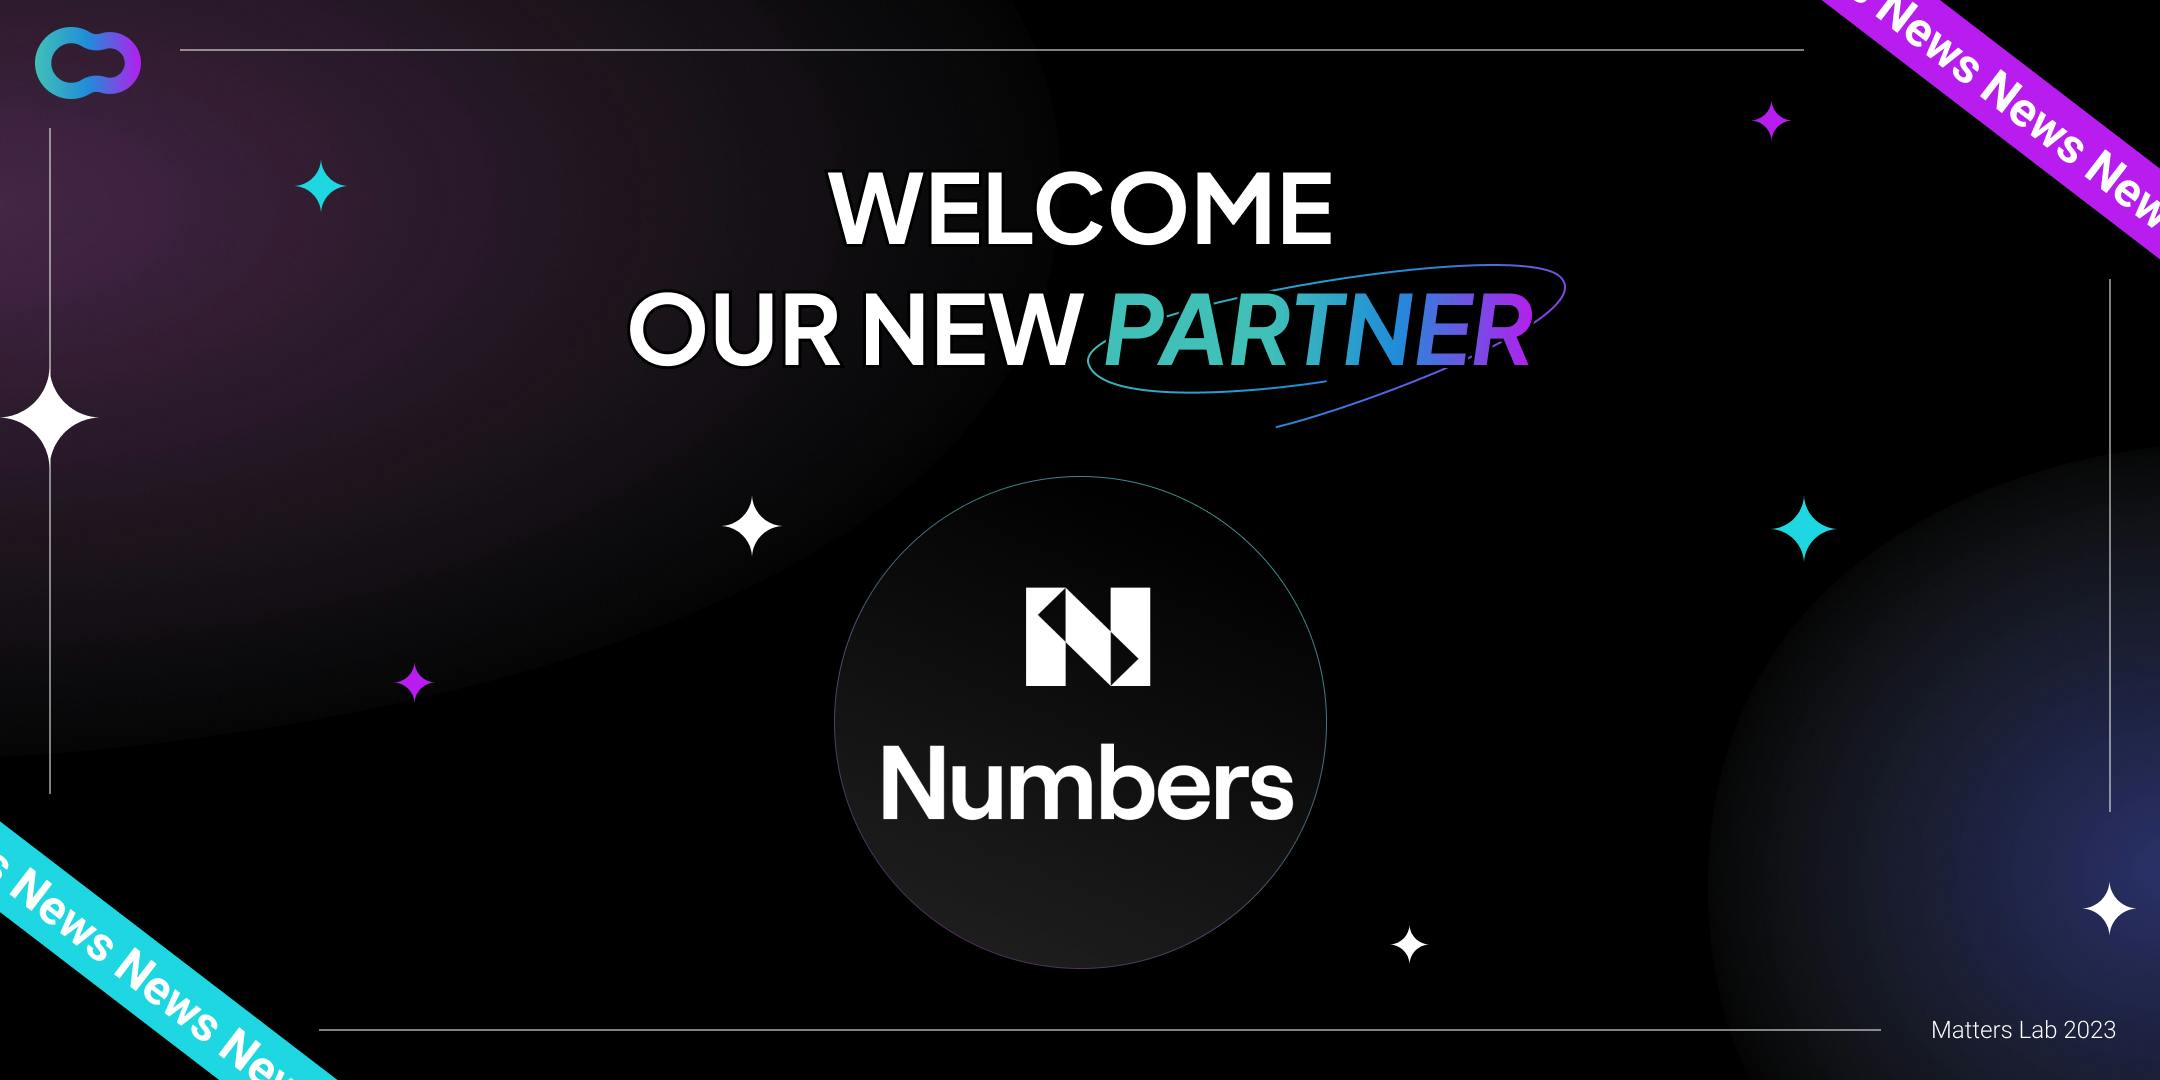 Matters Lab Partners with Numbers Protocol: Extending Creator Journey Toward Traceable Digital Assets and Veracity